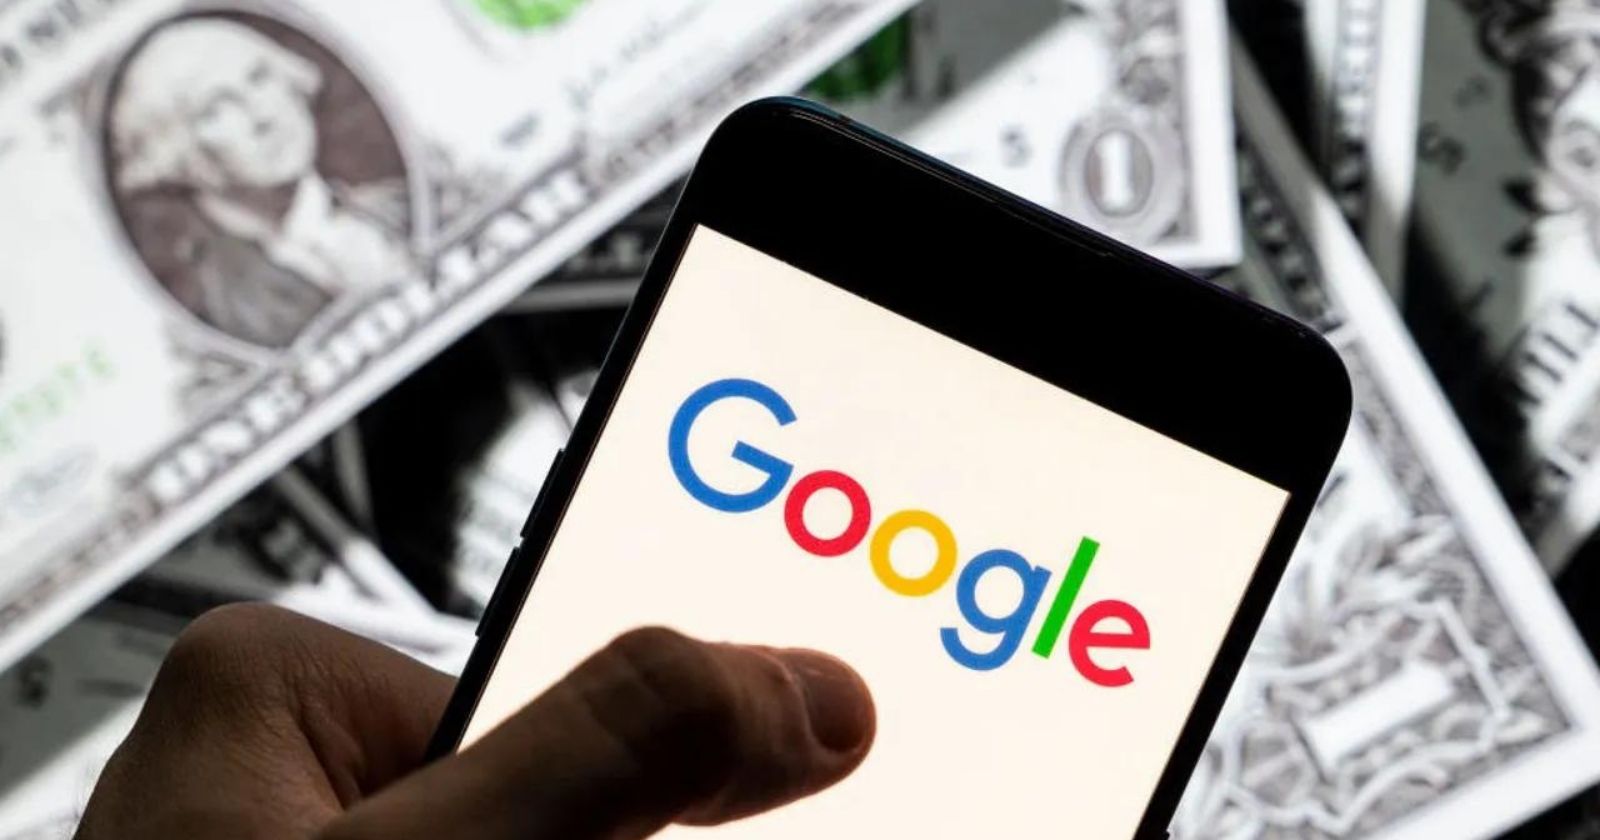 The amount of money Google has earned has become clear!